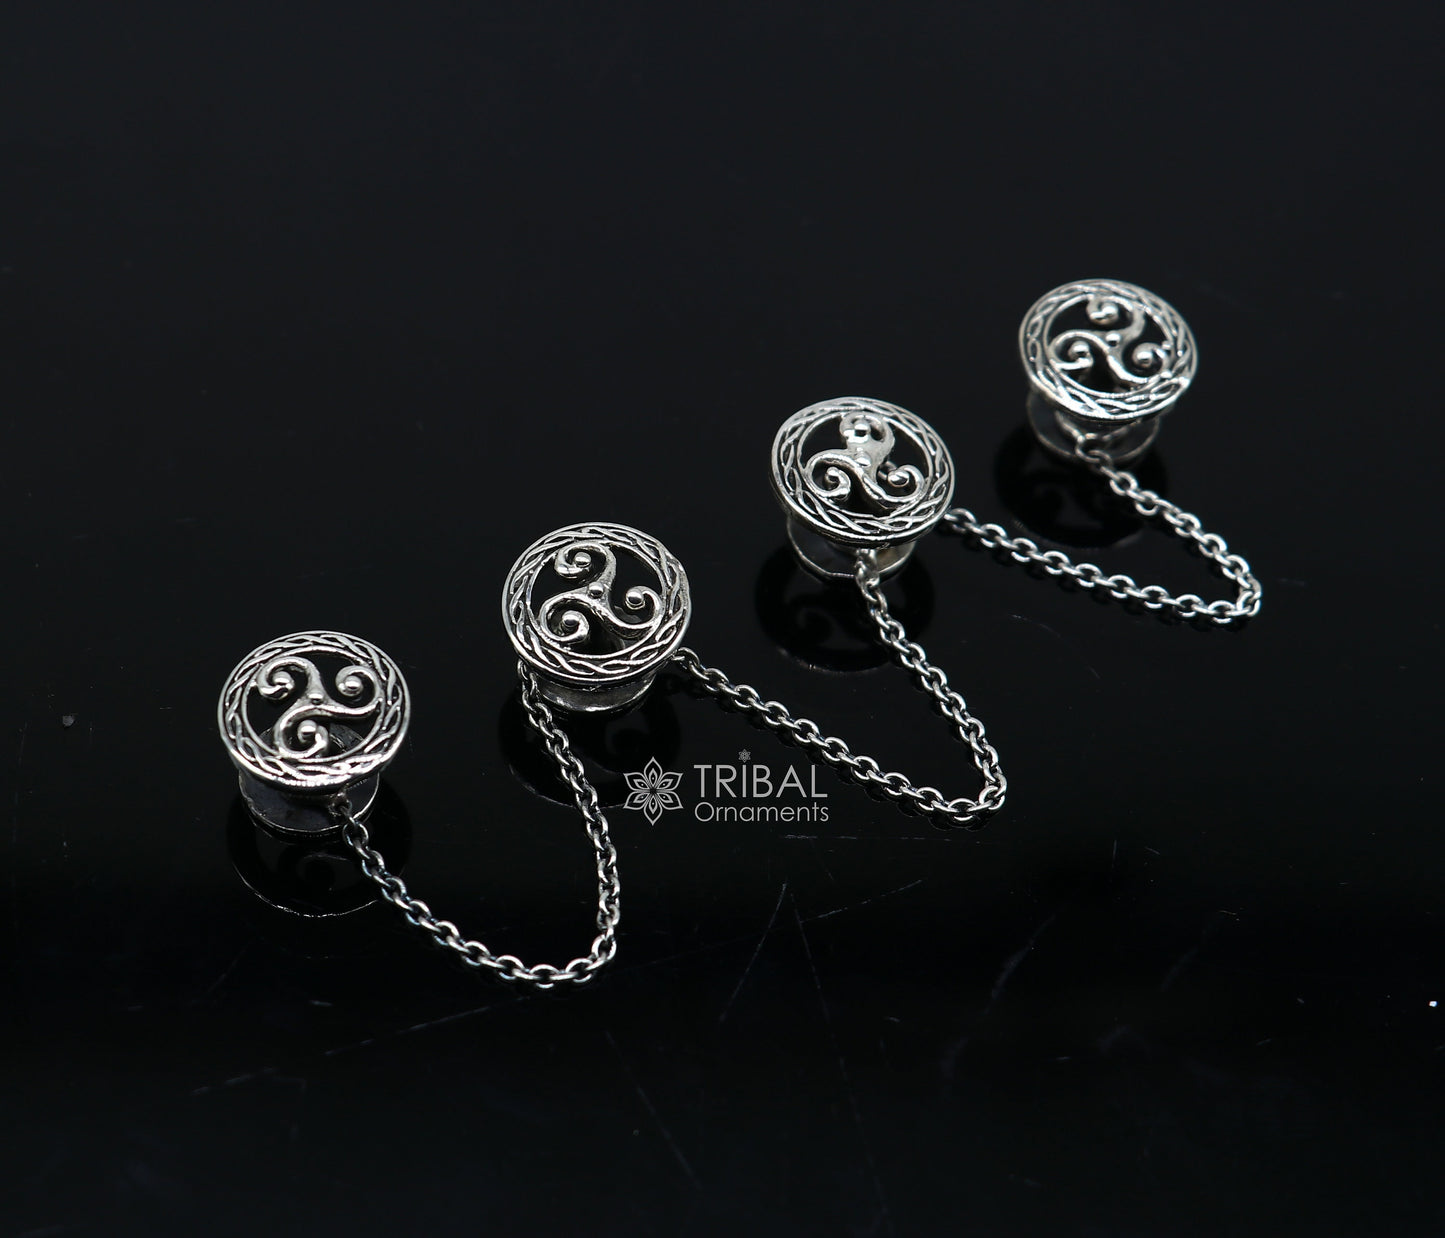 Celtic spiral triskele symbol 925 Sterling silver handmade gorgeous high-quality buttons or cufflinks for kurtas, best gifting jewelry btn52 - TRIBAL ORNAMENTS